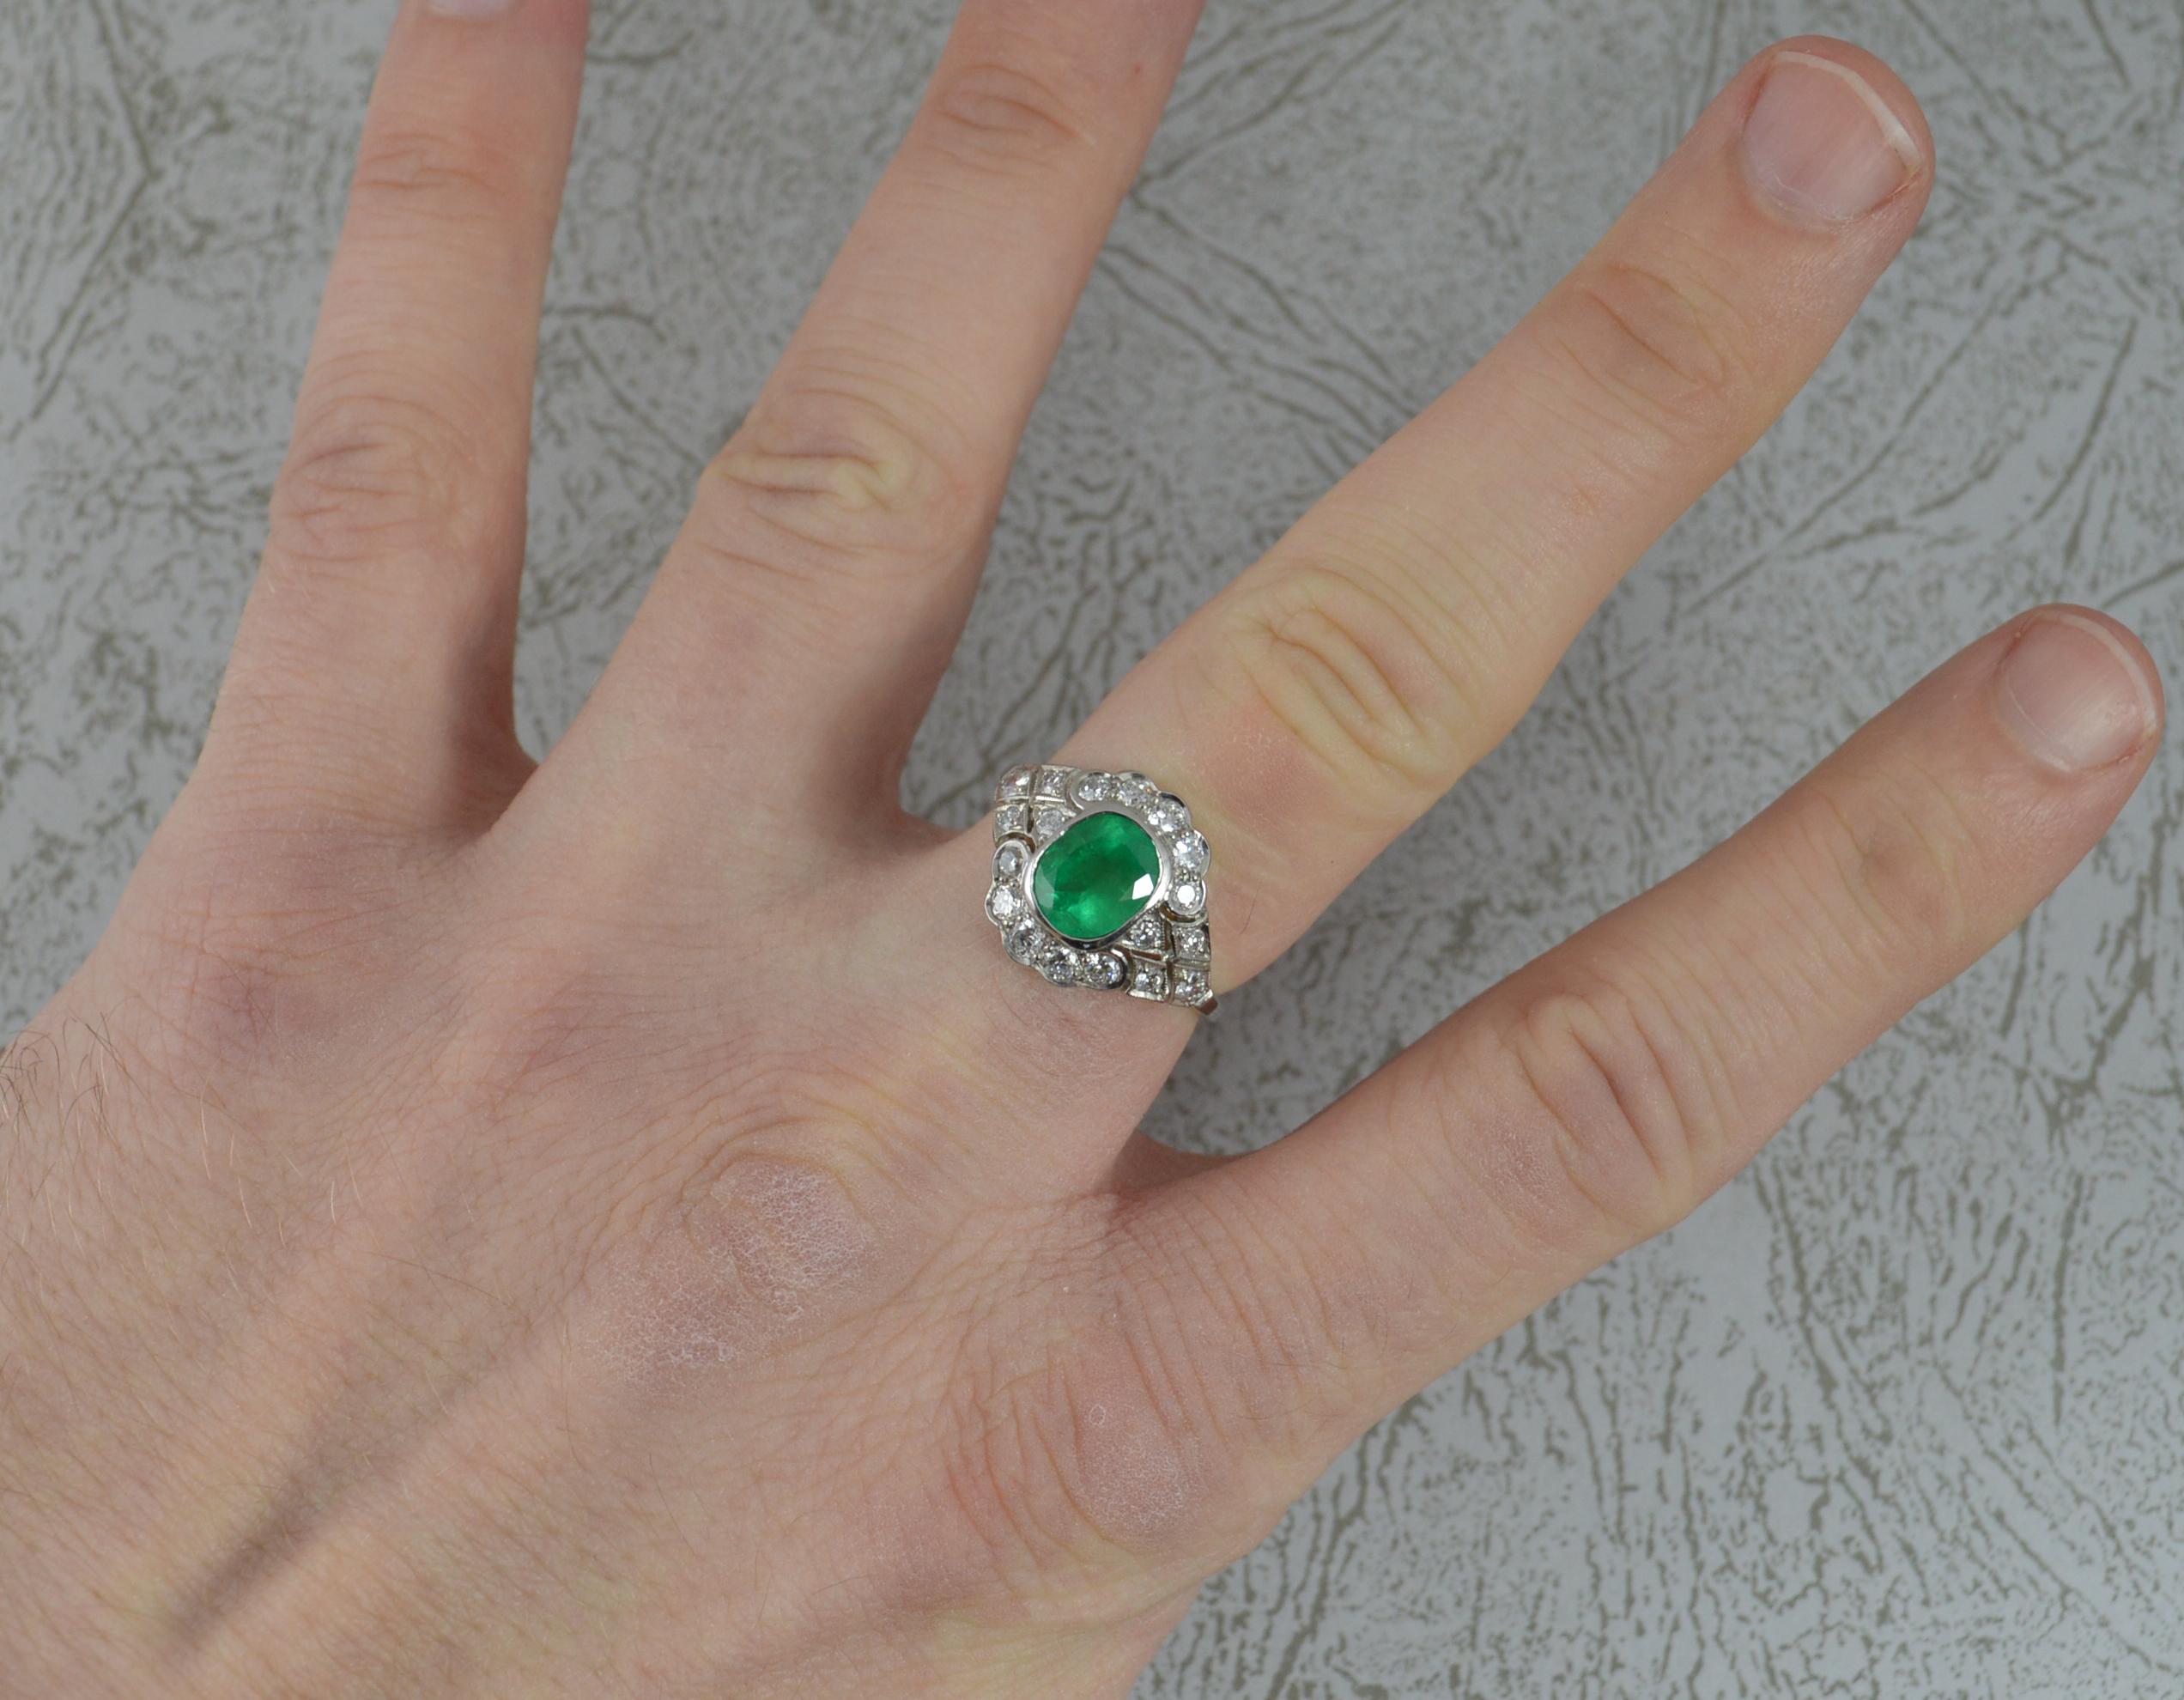 A stunning natural Emerald and Diamond ring.
Modelled in 950 grade platinum.
Designed with a cushion oval emerald, believed to be of Colombian origin in bezel setting. Surrounding are 18 natural Vs clarity diamonds in grain settings with pierced